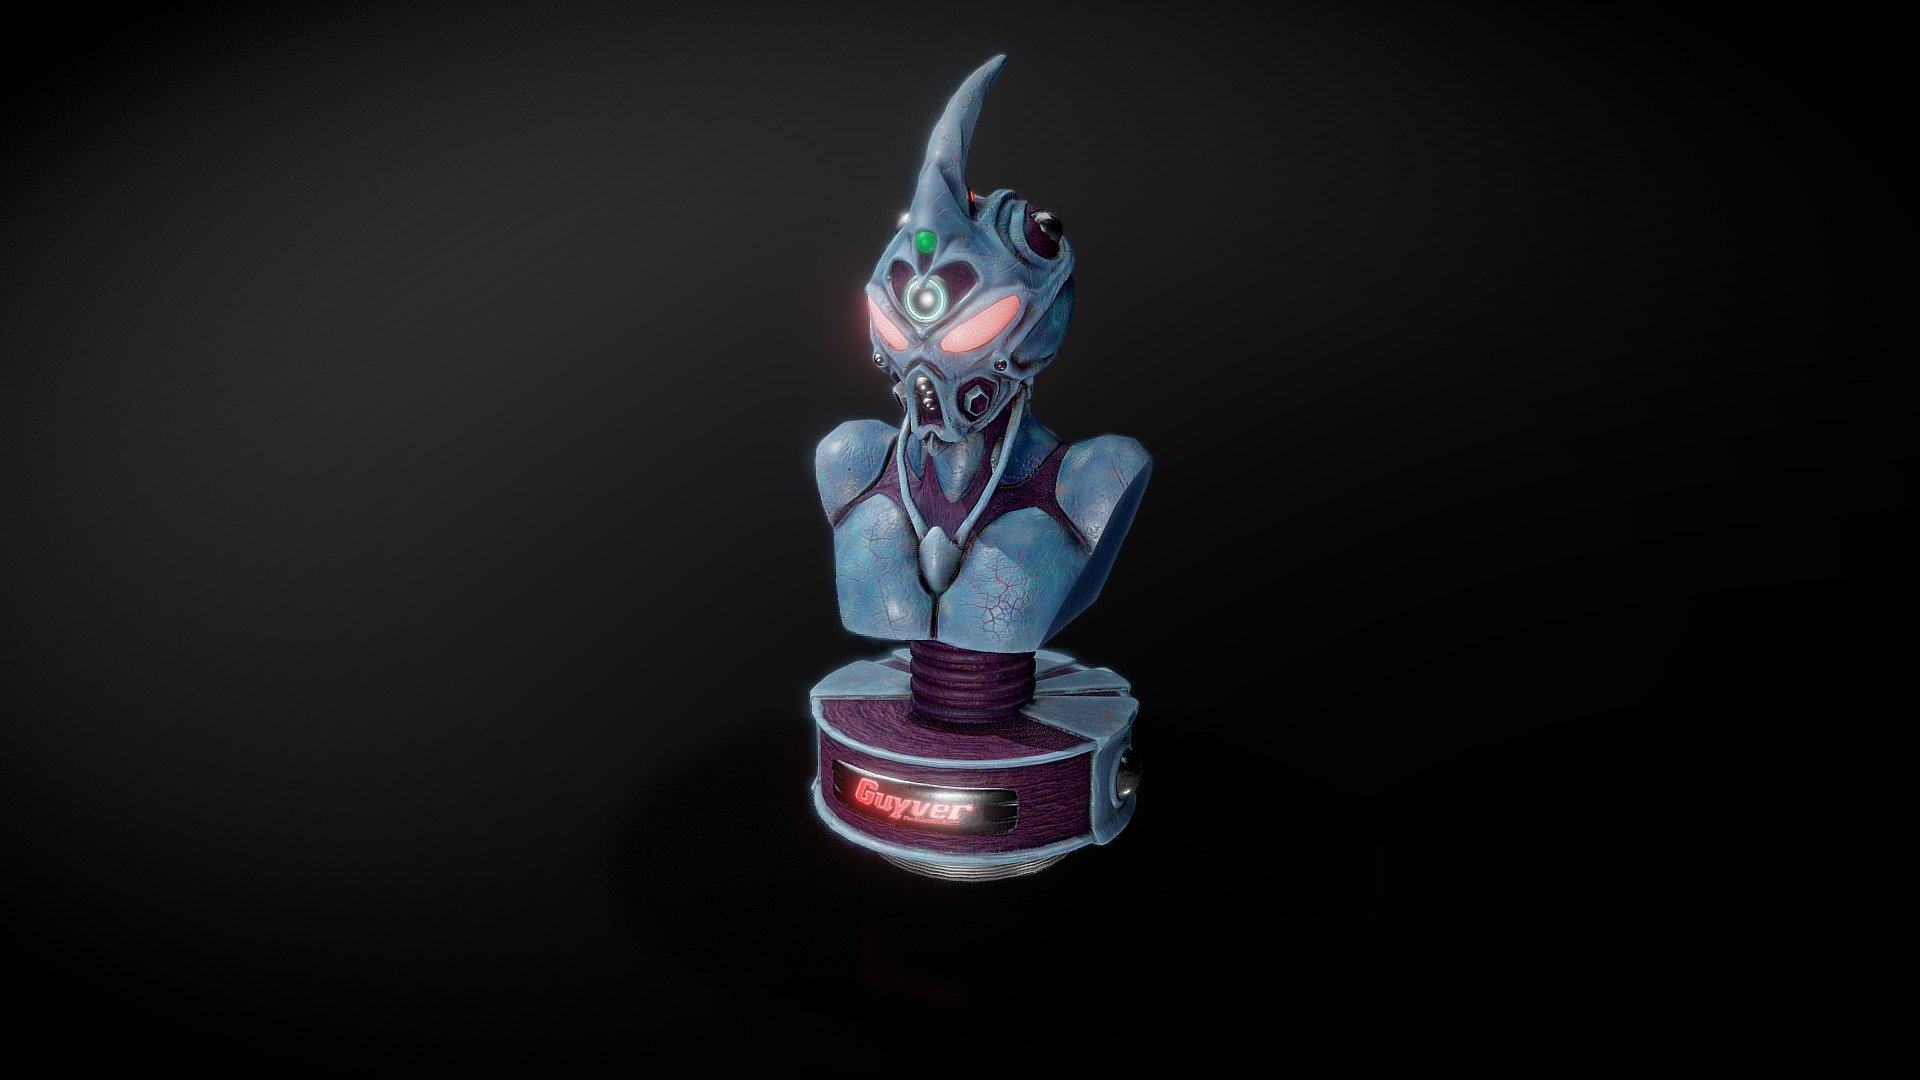 Hi all! This is my Guyver Bust Fan Art. I did this model in one week as a last exercise of my second year at AIV ( Accademia Italiana Videogiochi). Hope you like this, enjoy! - Guyver Bust Fan Art - 3D model by Gianluigi.Ferrantino 3d model